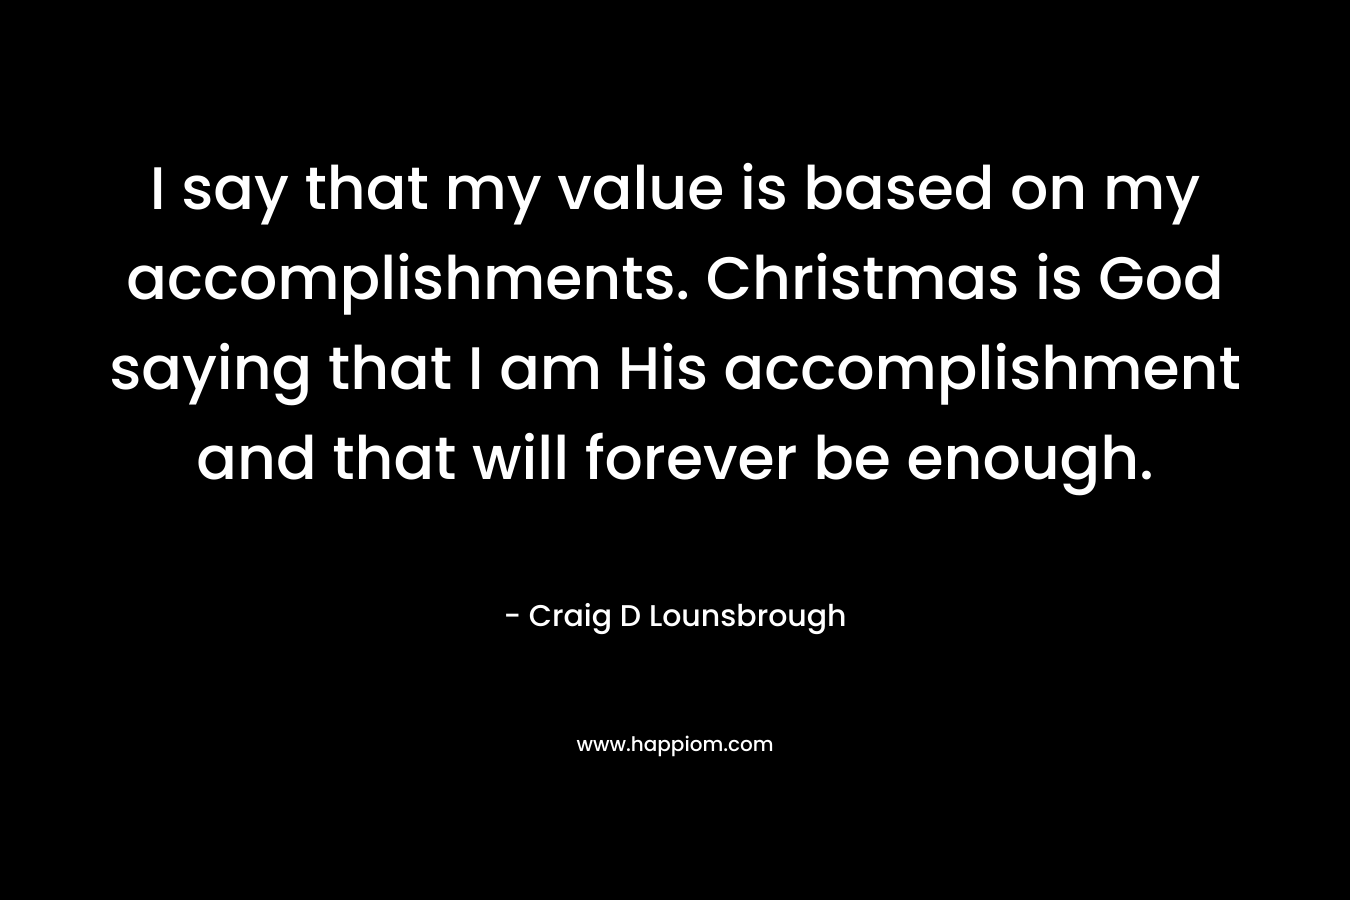 I say that my value is based on my accomplishments. Christmas is God saying that I am His accomplishment and that will forever be enough.